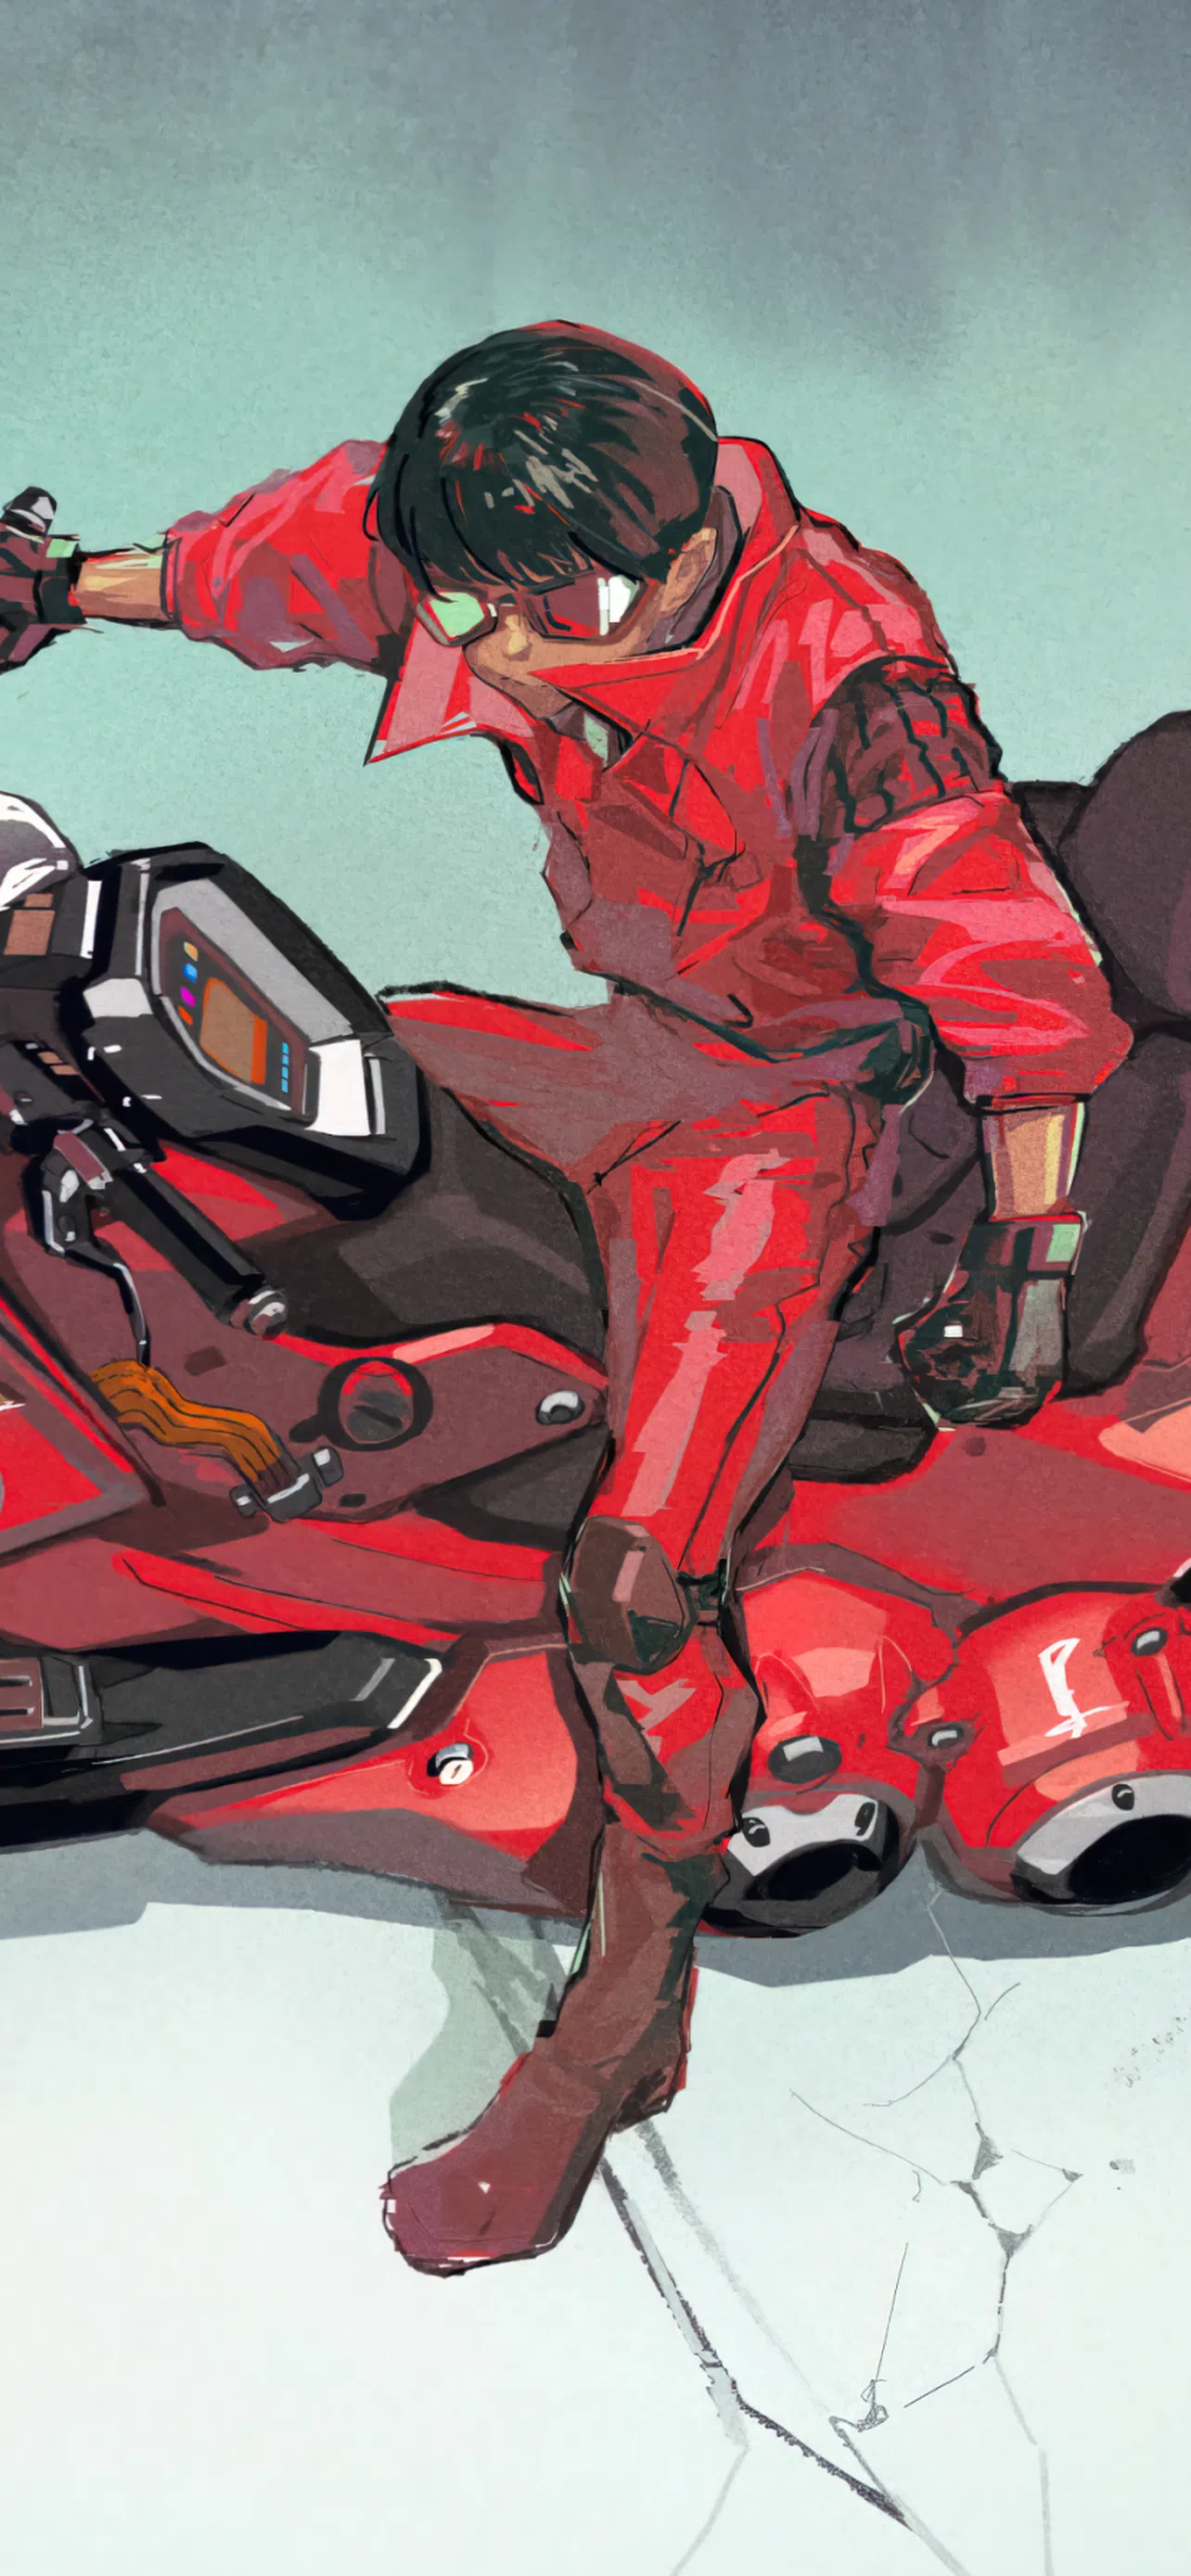 Viral Akira Remaster Sparks Outrage After Bringing in AI